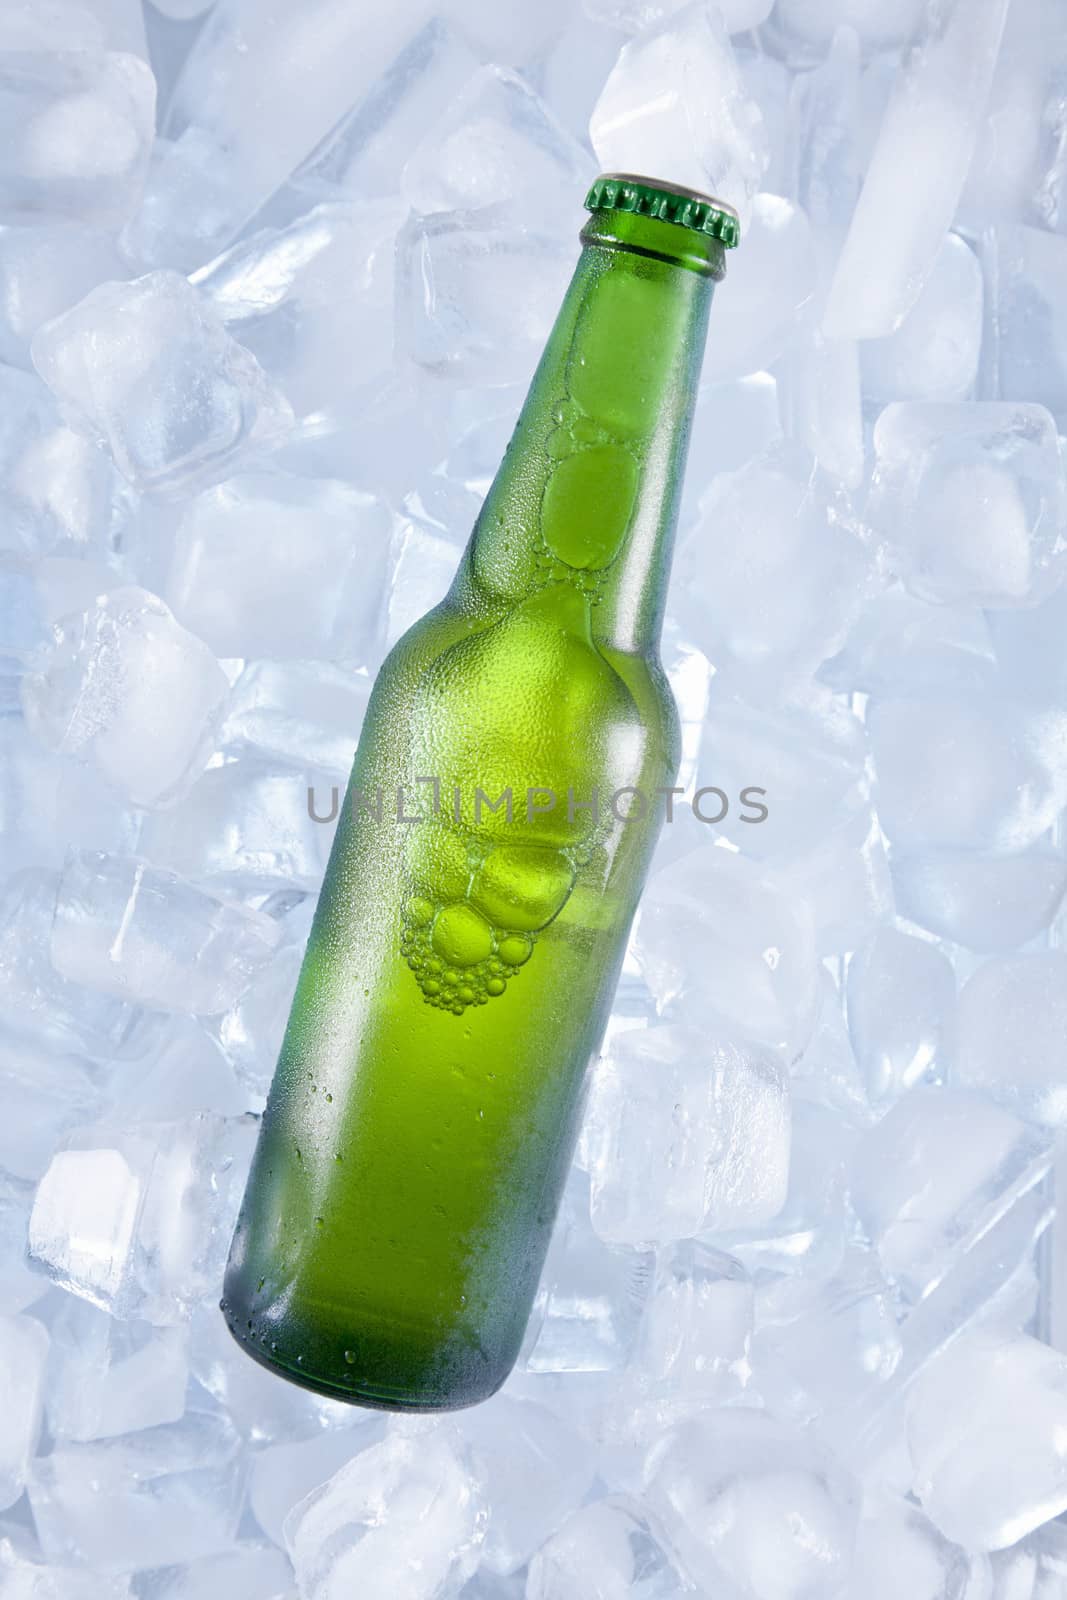 A green bottle of beer on ice.